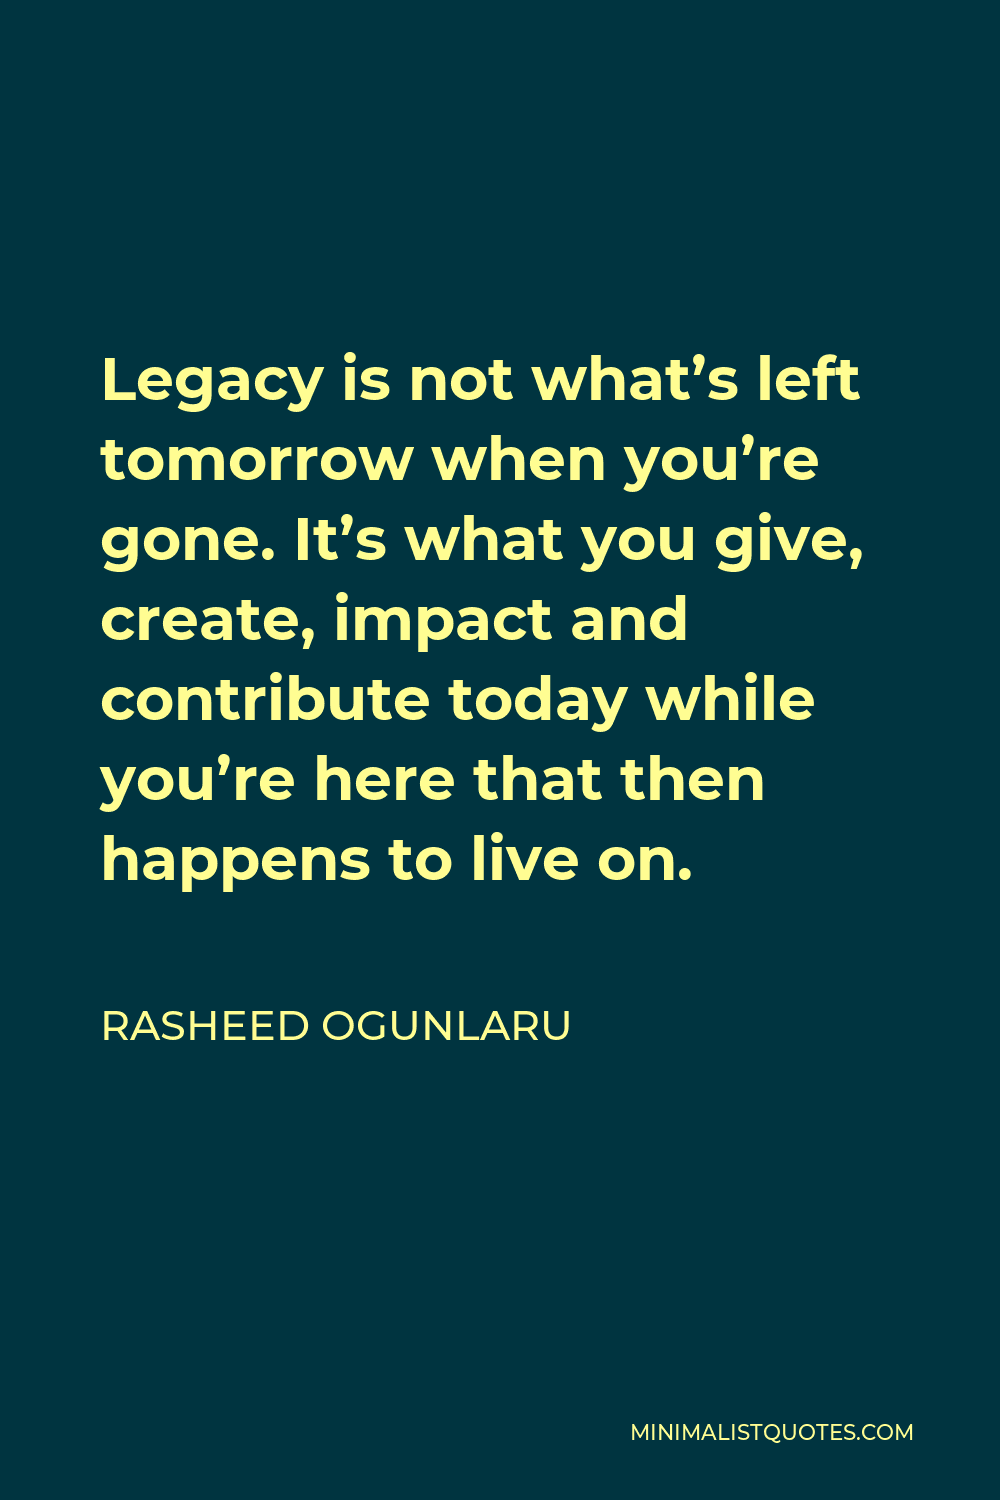 Rasheed Ogunlaru Quote - Legacy is not what’s left tomorrow when you’re gone. It’s what you give, create, impact and contribute today while you’re here that then happens to live on.